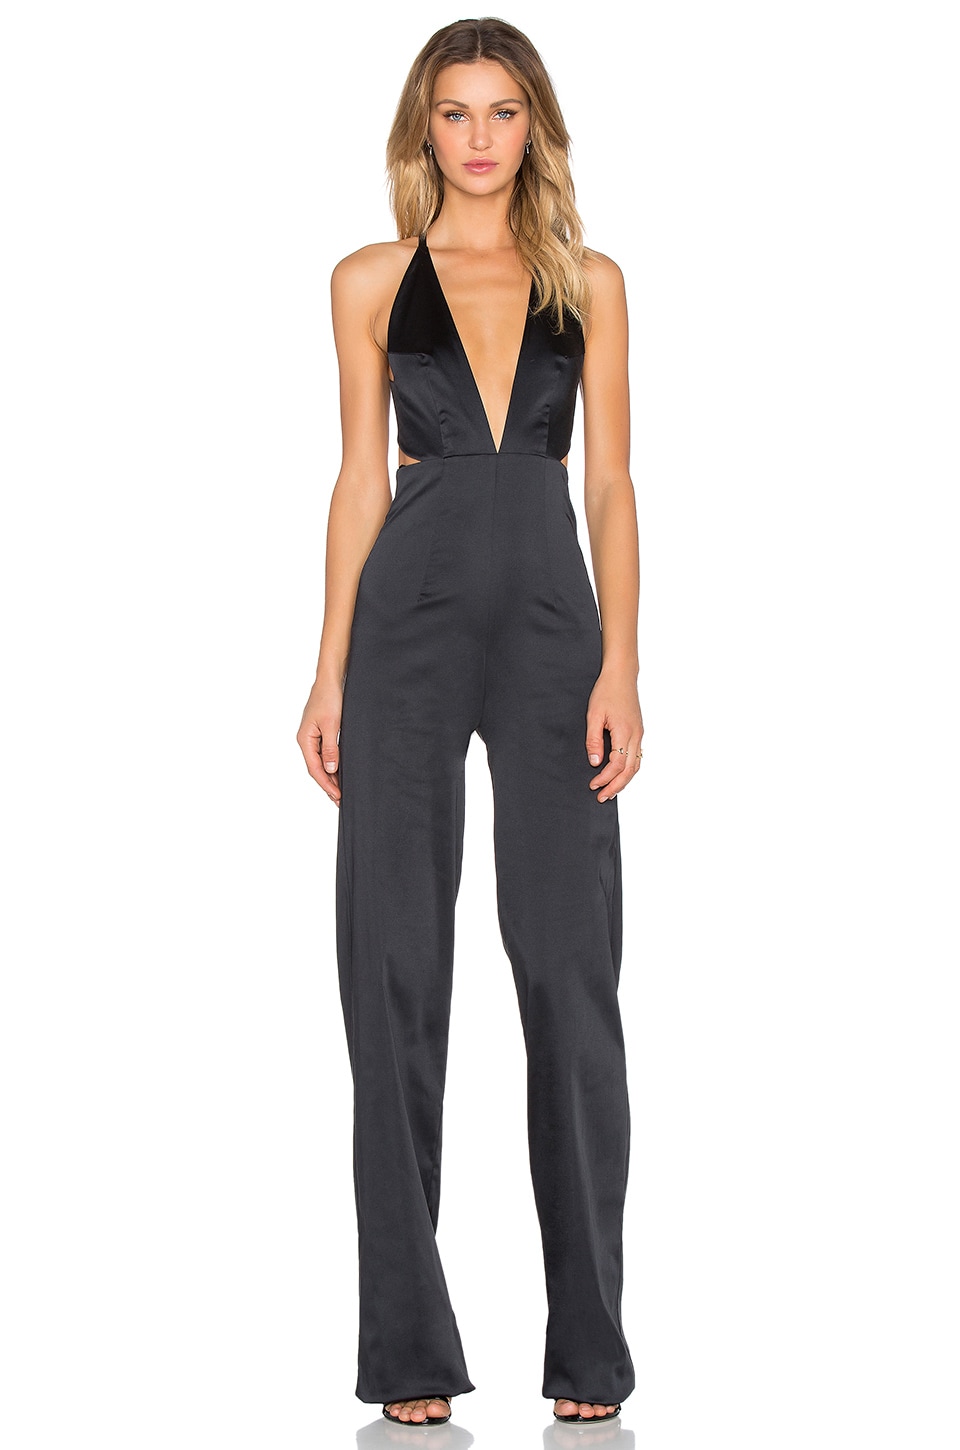 SOLACE London Peggy Jumpsuit in Black | REVOLVE